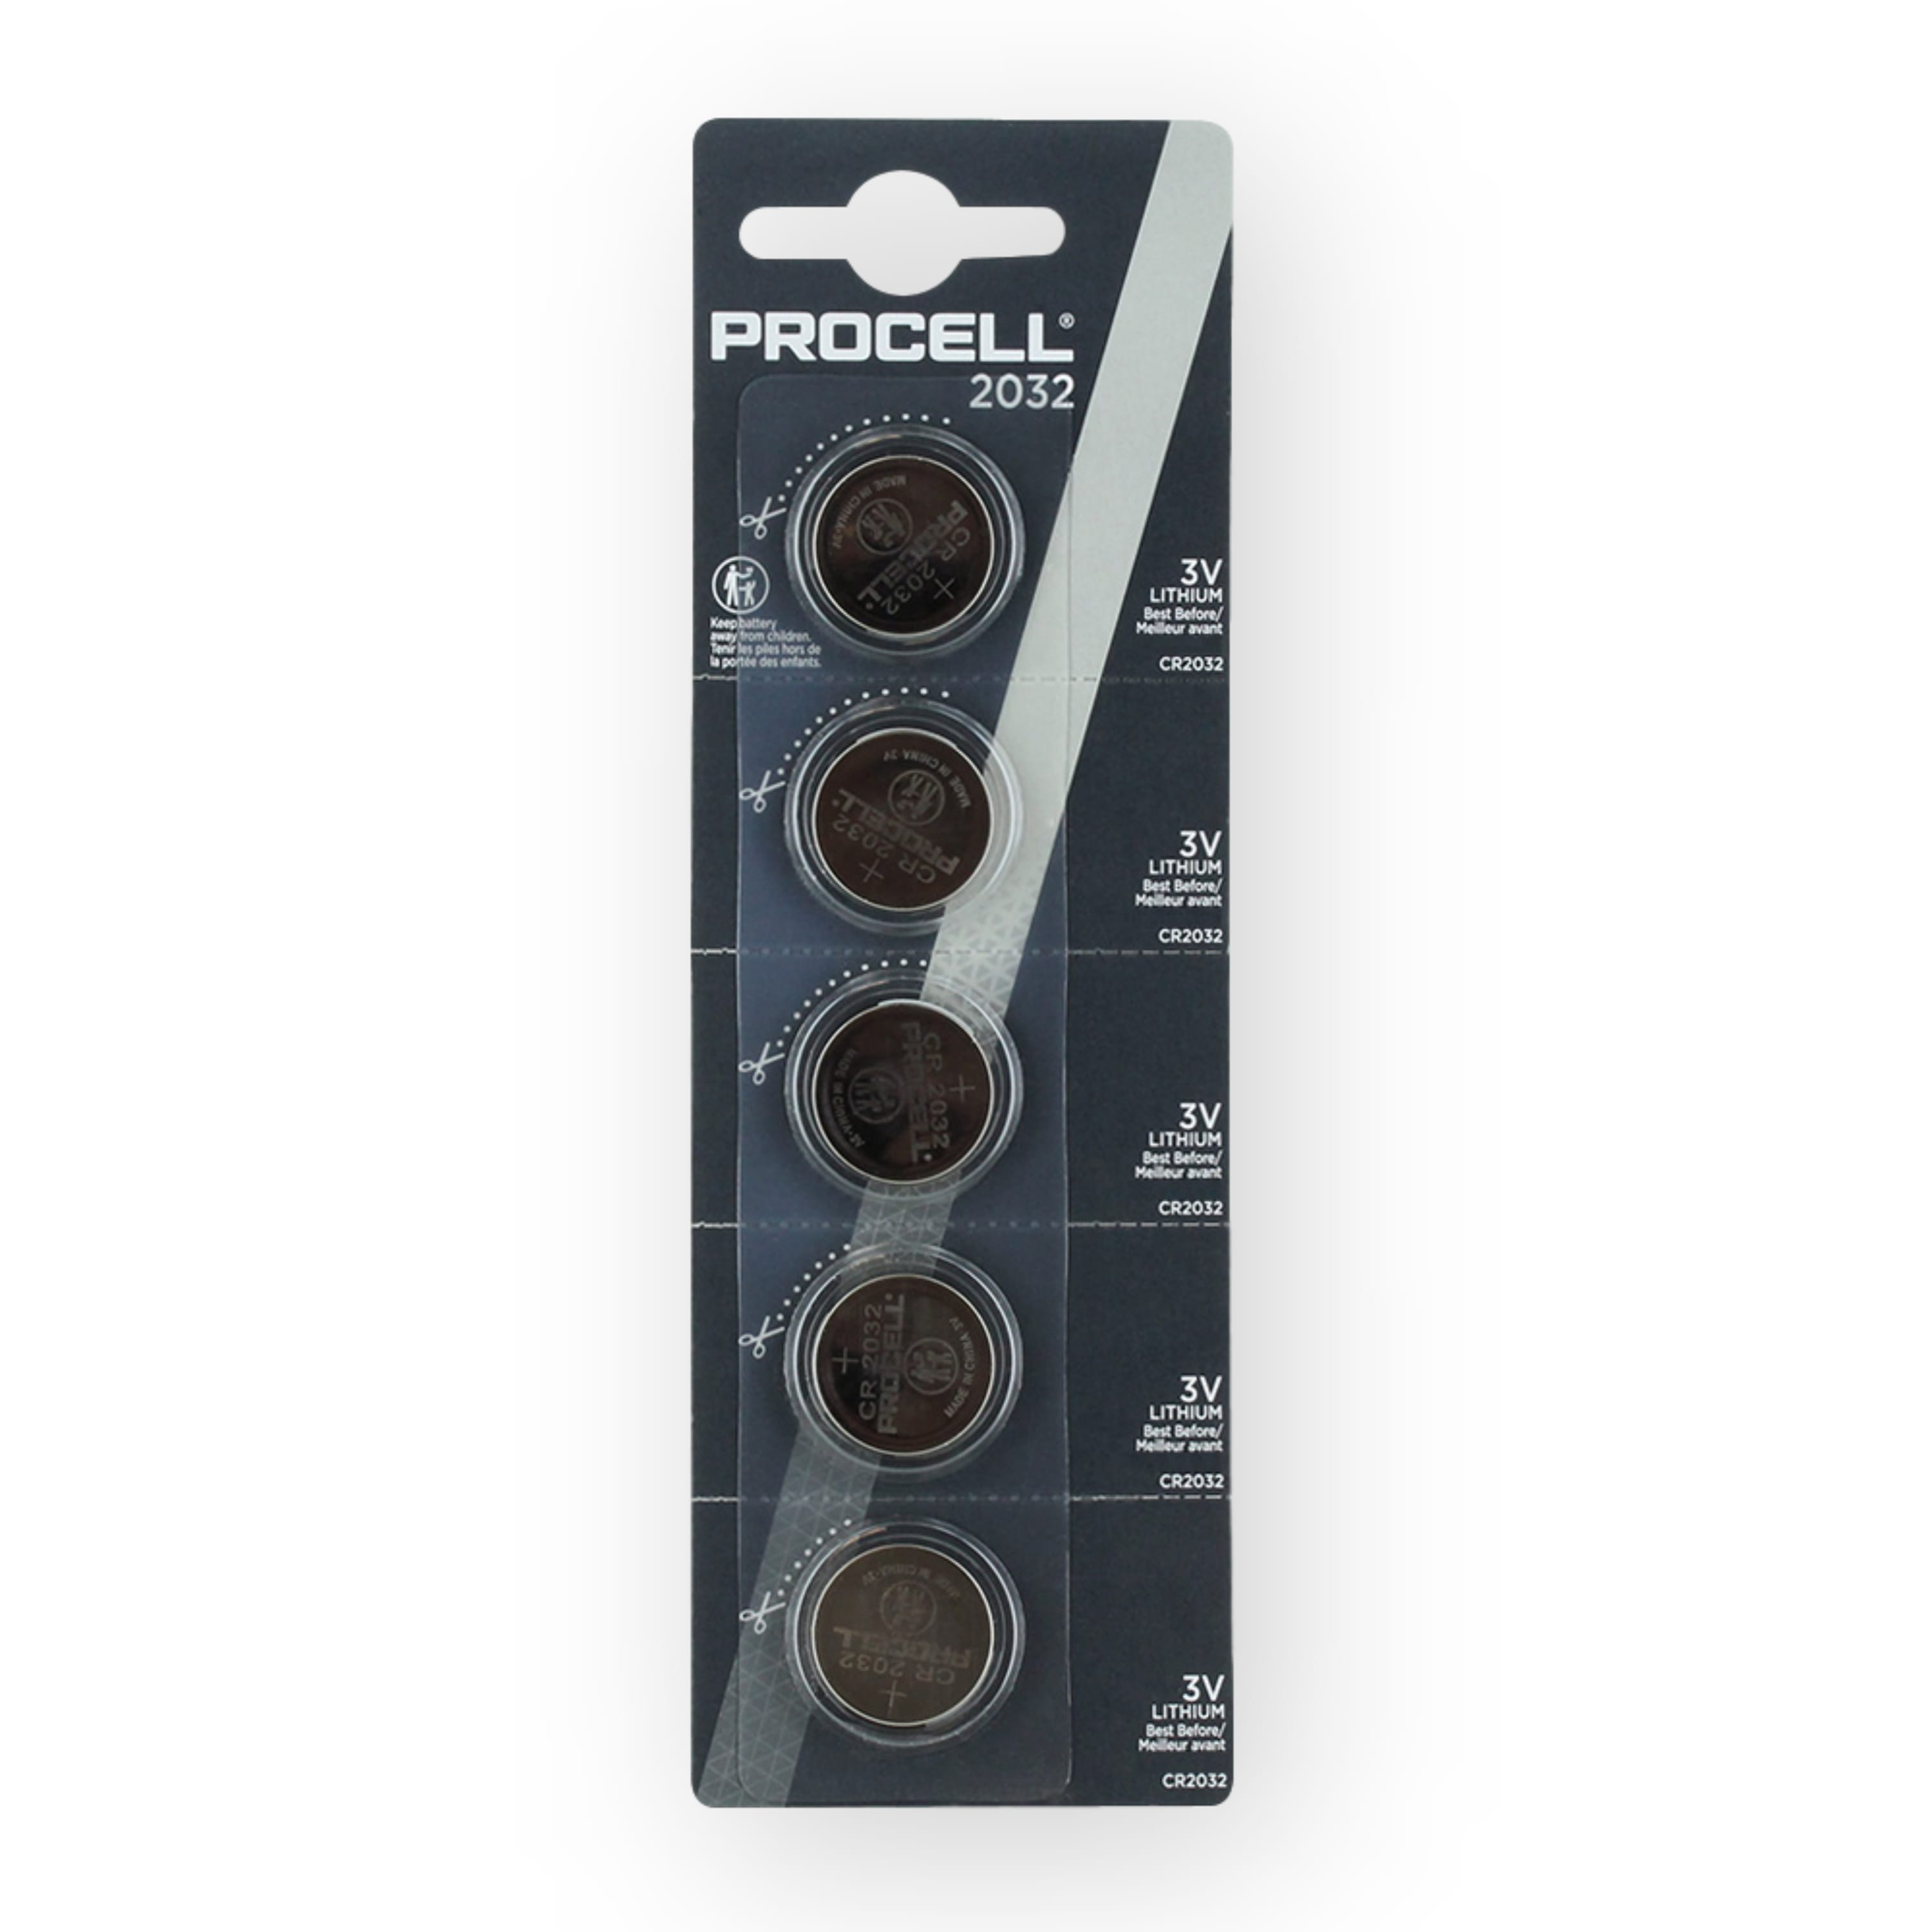 Duracell Procell CR2032 Intense Lithium Batteries 3v PX2032 5-Pack